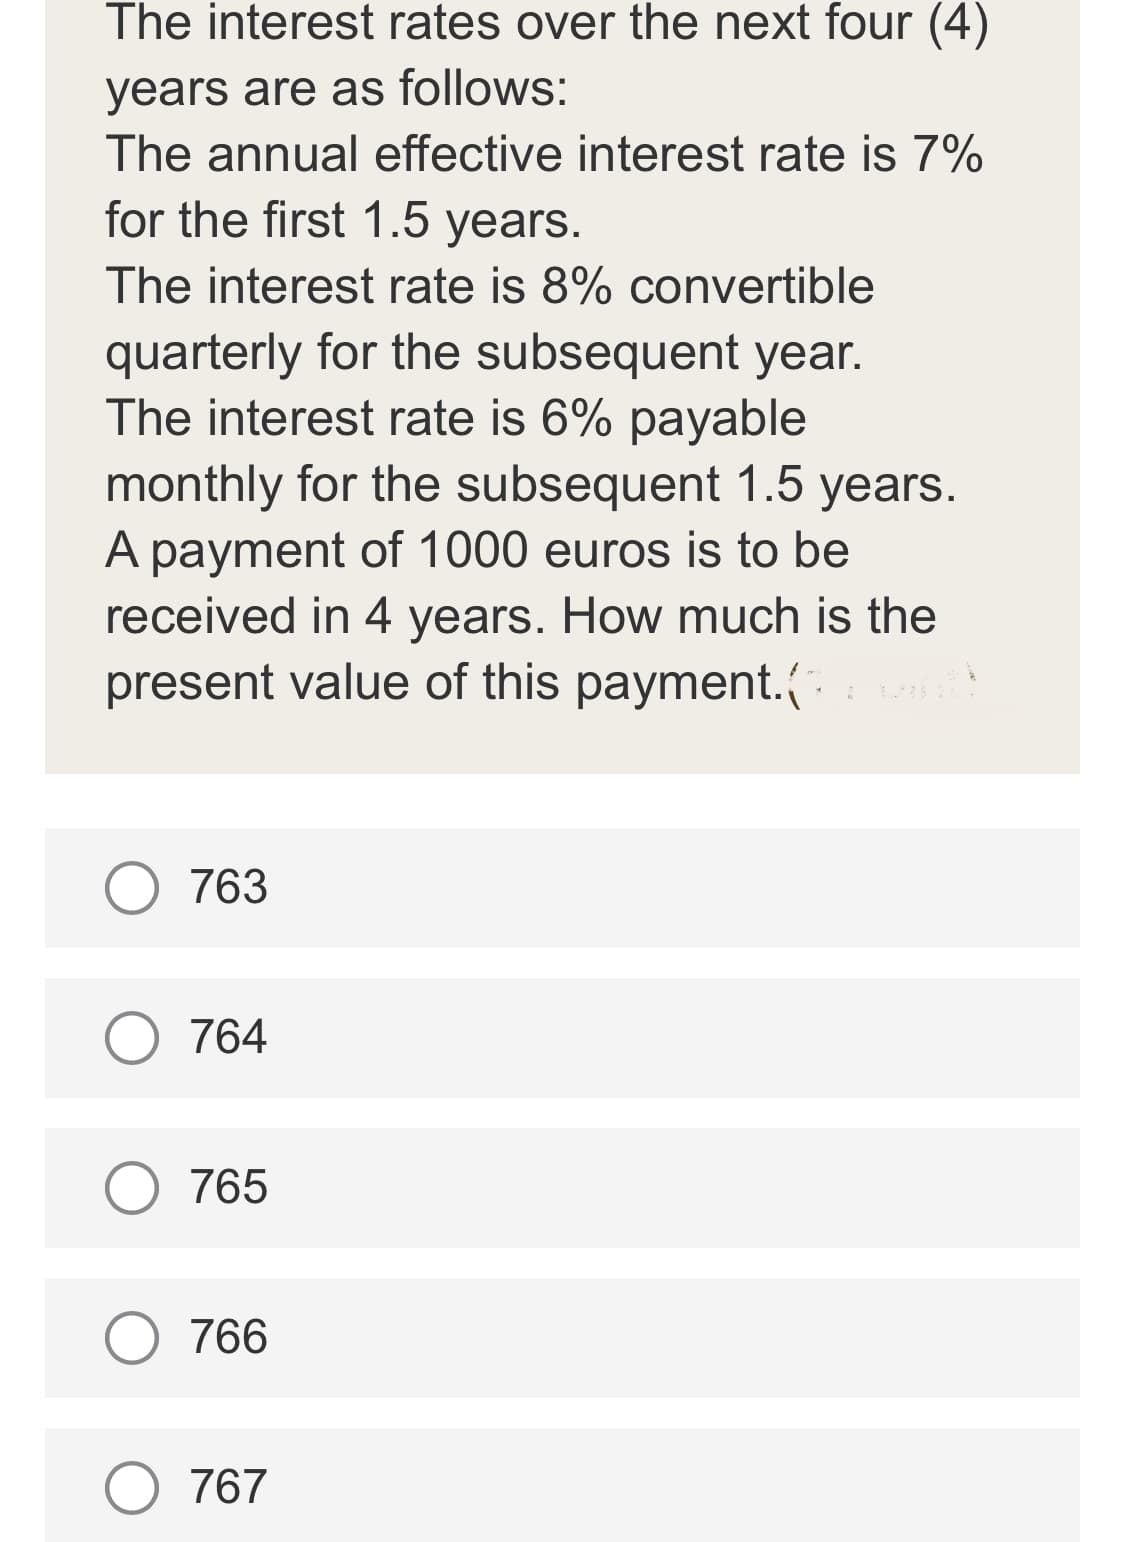 The interest rates over the next four (4)
years are as follows:
The annual effective interest rate is 7%
for the first 1.5 years.
The interest rate is 8% convertible
quarterly for the subsequent year.
The interest rate is 6% payable
monthly for the subsequent 1.5 years.
A payment of 1000 euros is to be
received in 4 years. How much is the
present value of this payment.(
763
764
O 765
766
O 767